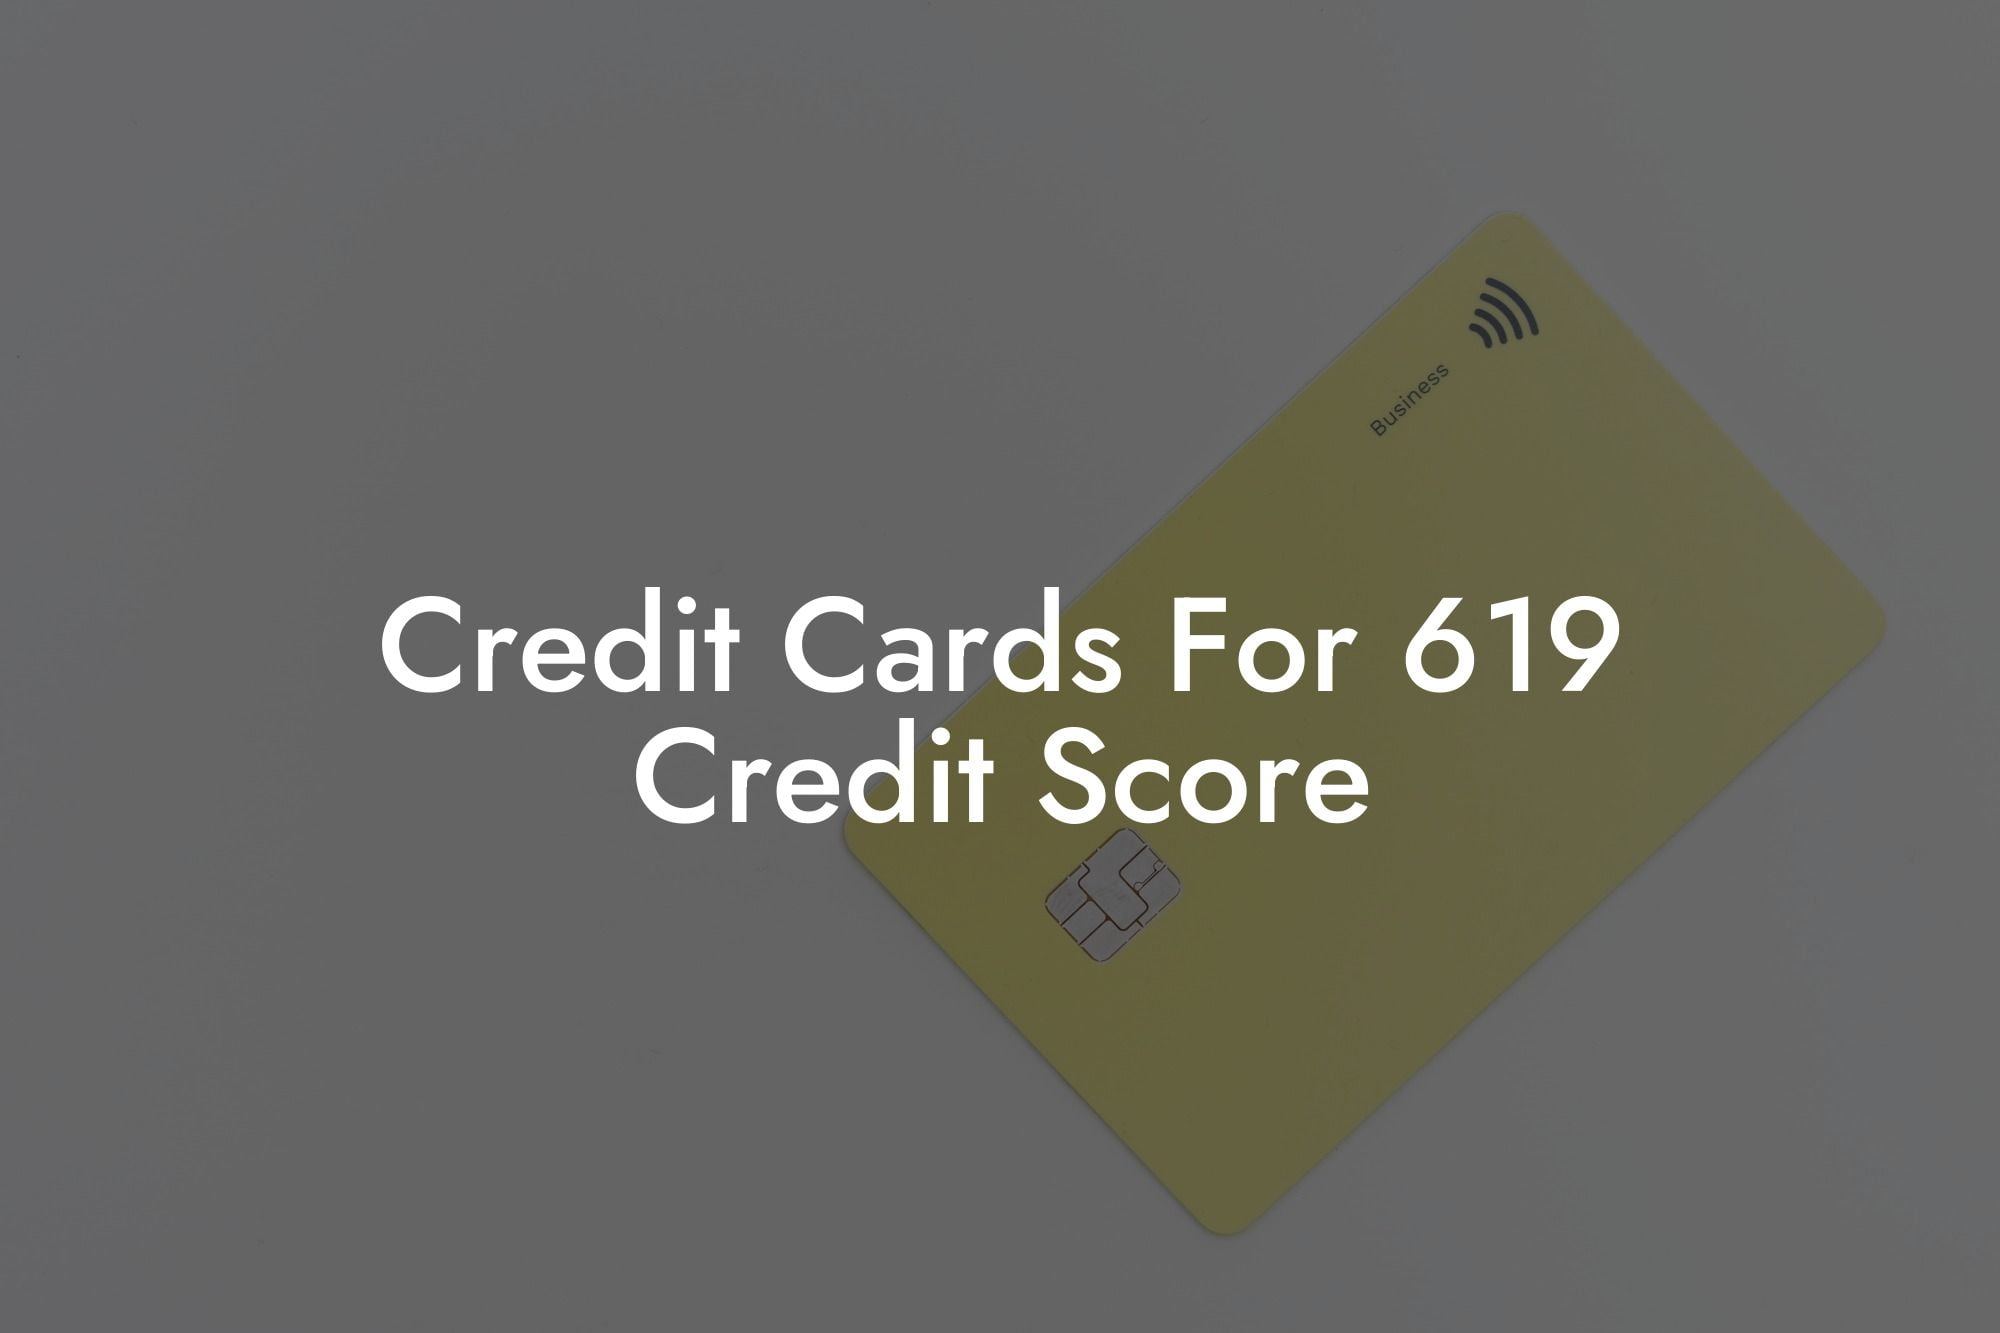 Credit Cards For 619 Credit Score